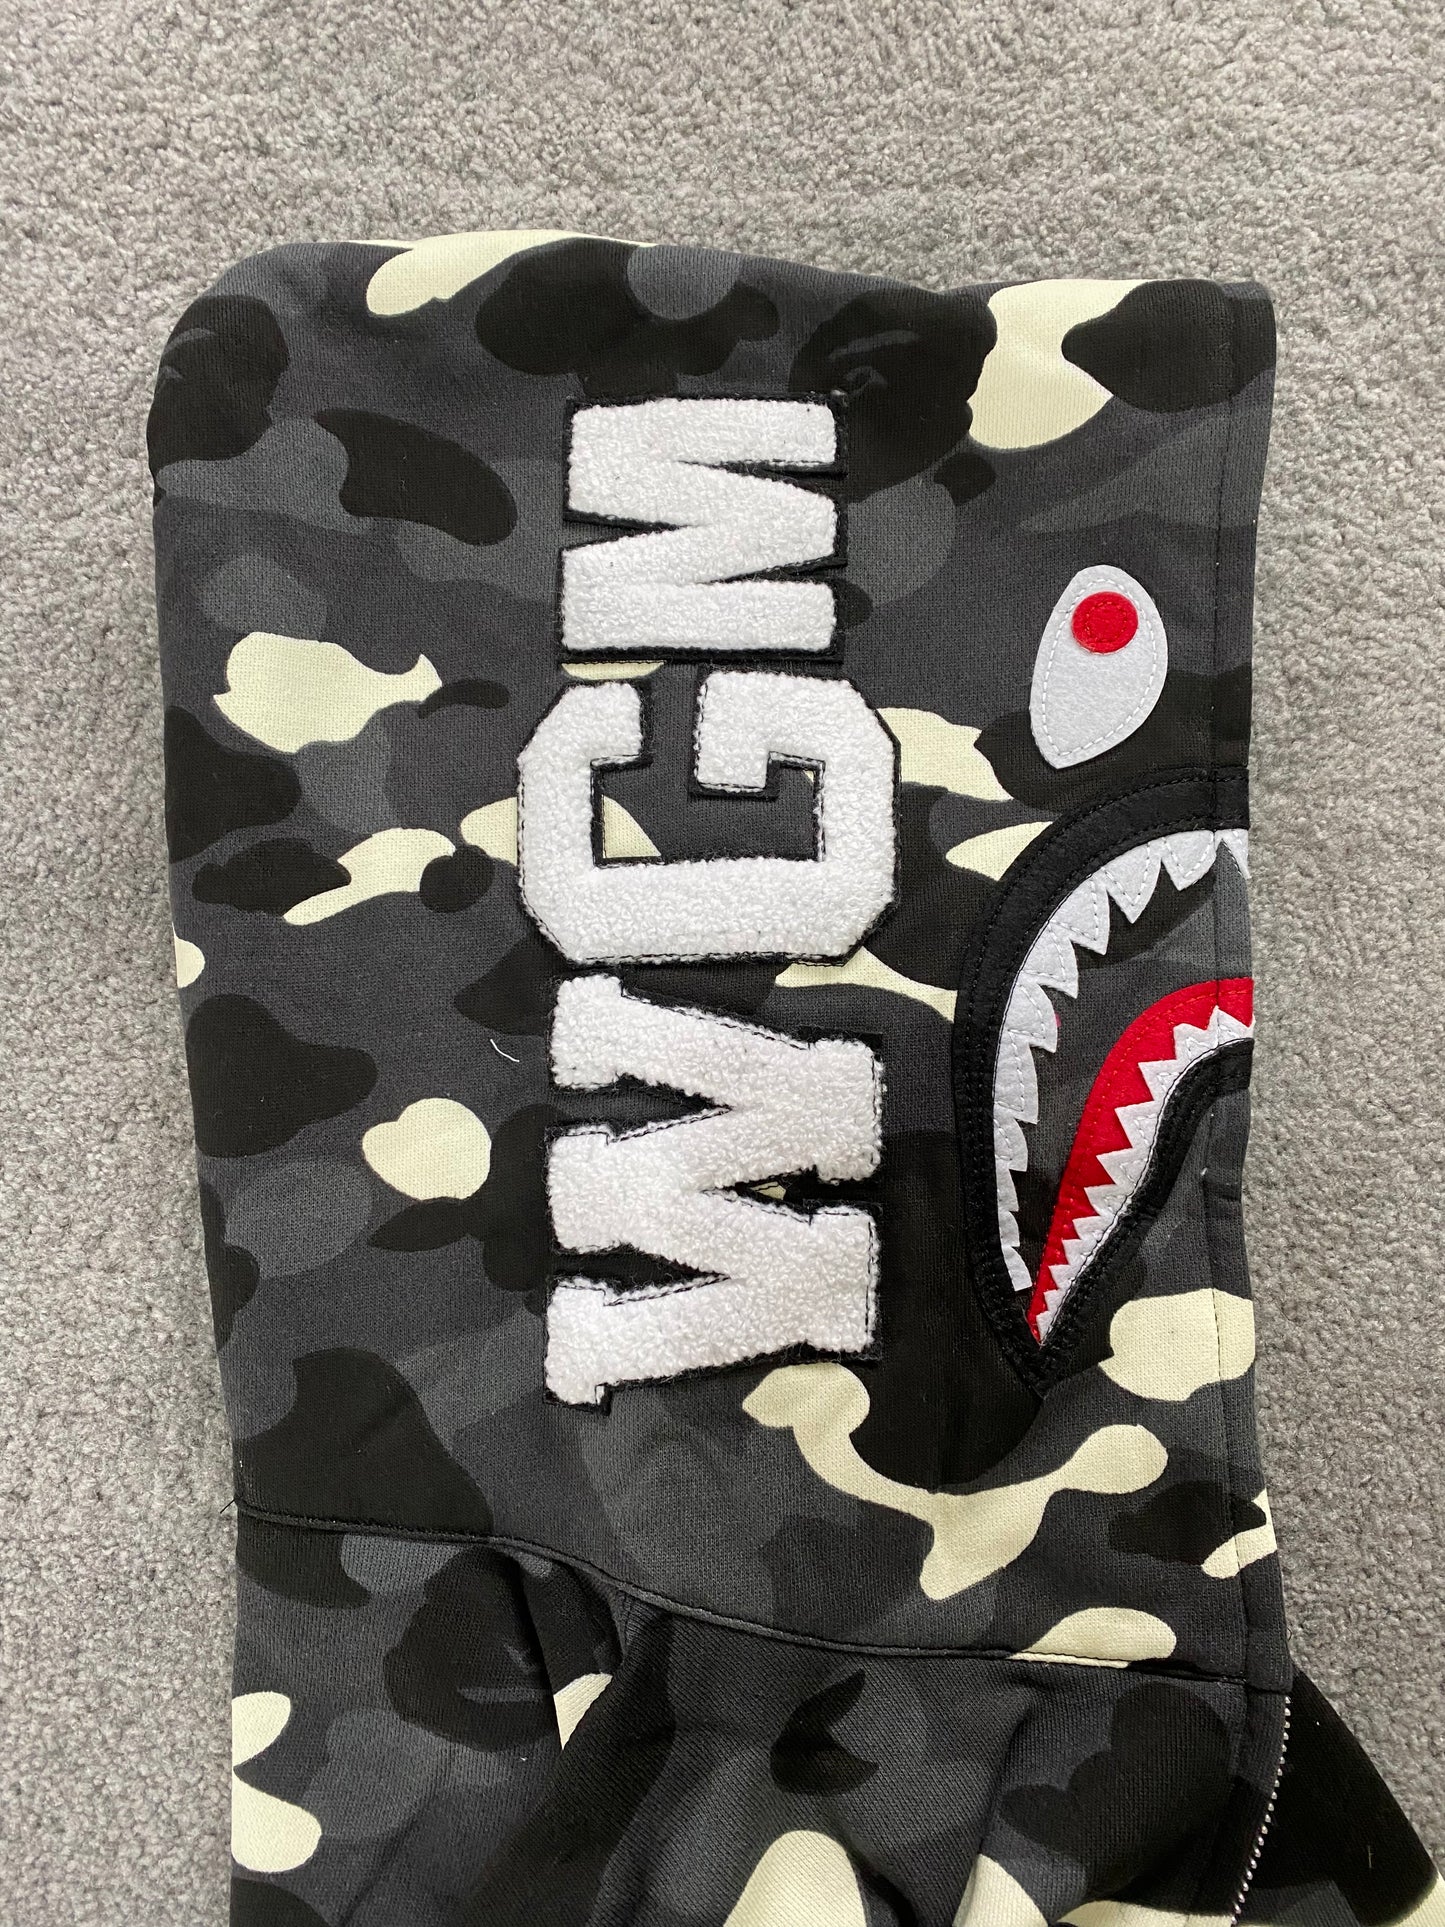 BAPE Black Camo Glow In The Dark Hoodie - Icy Clothes Ro